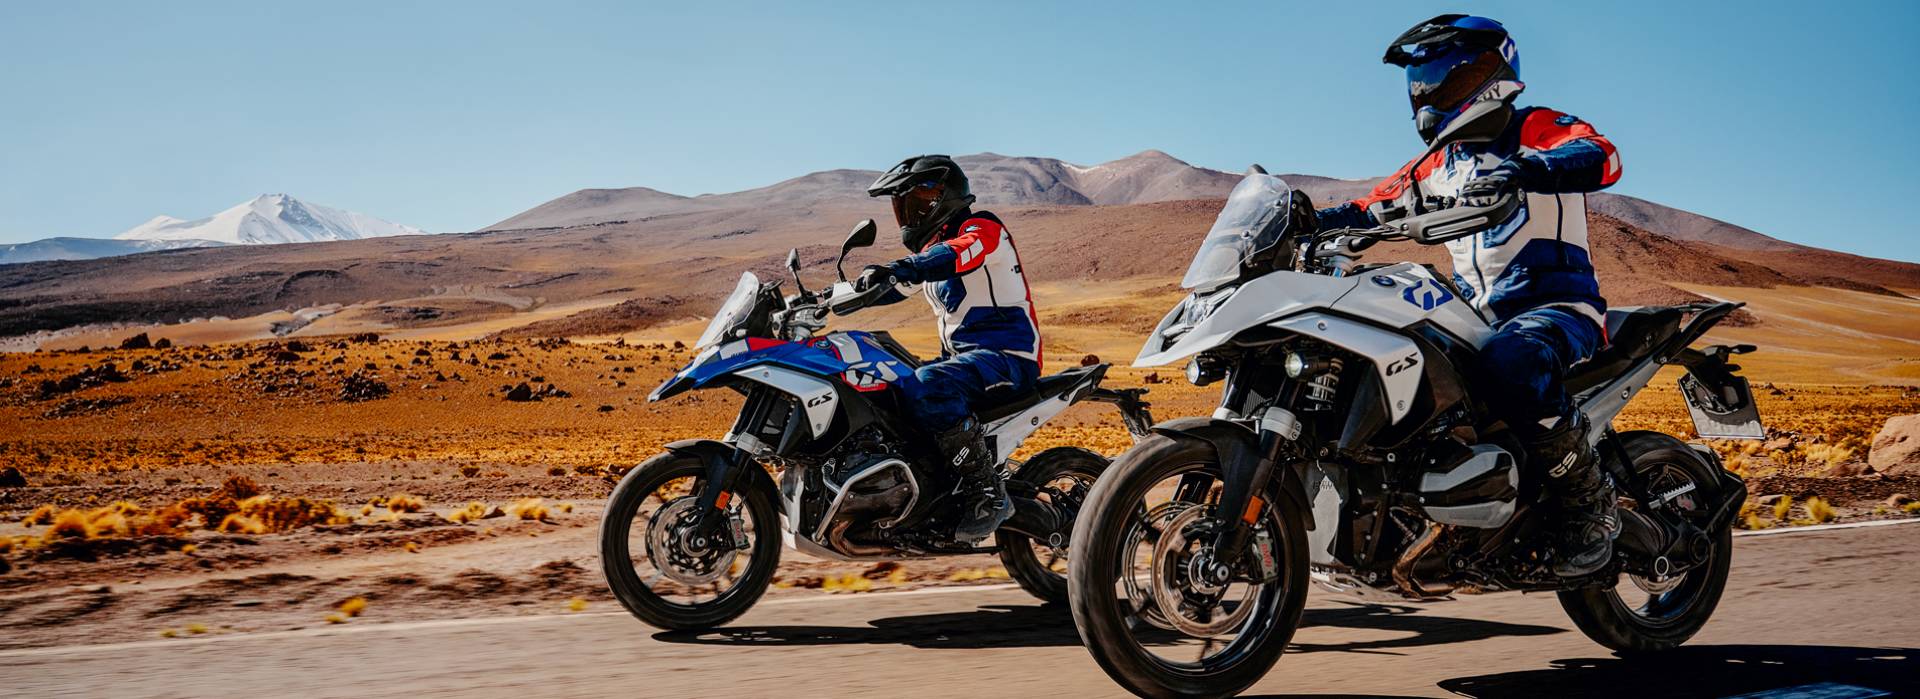 Set out to discover the new BMW R1300 GS